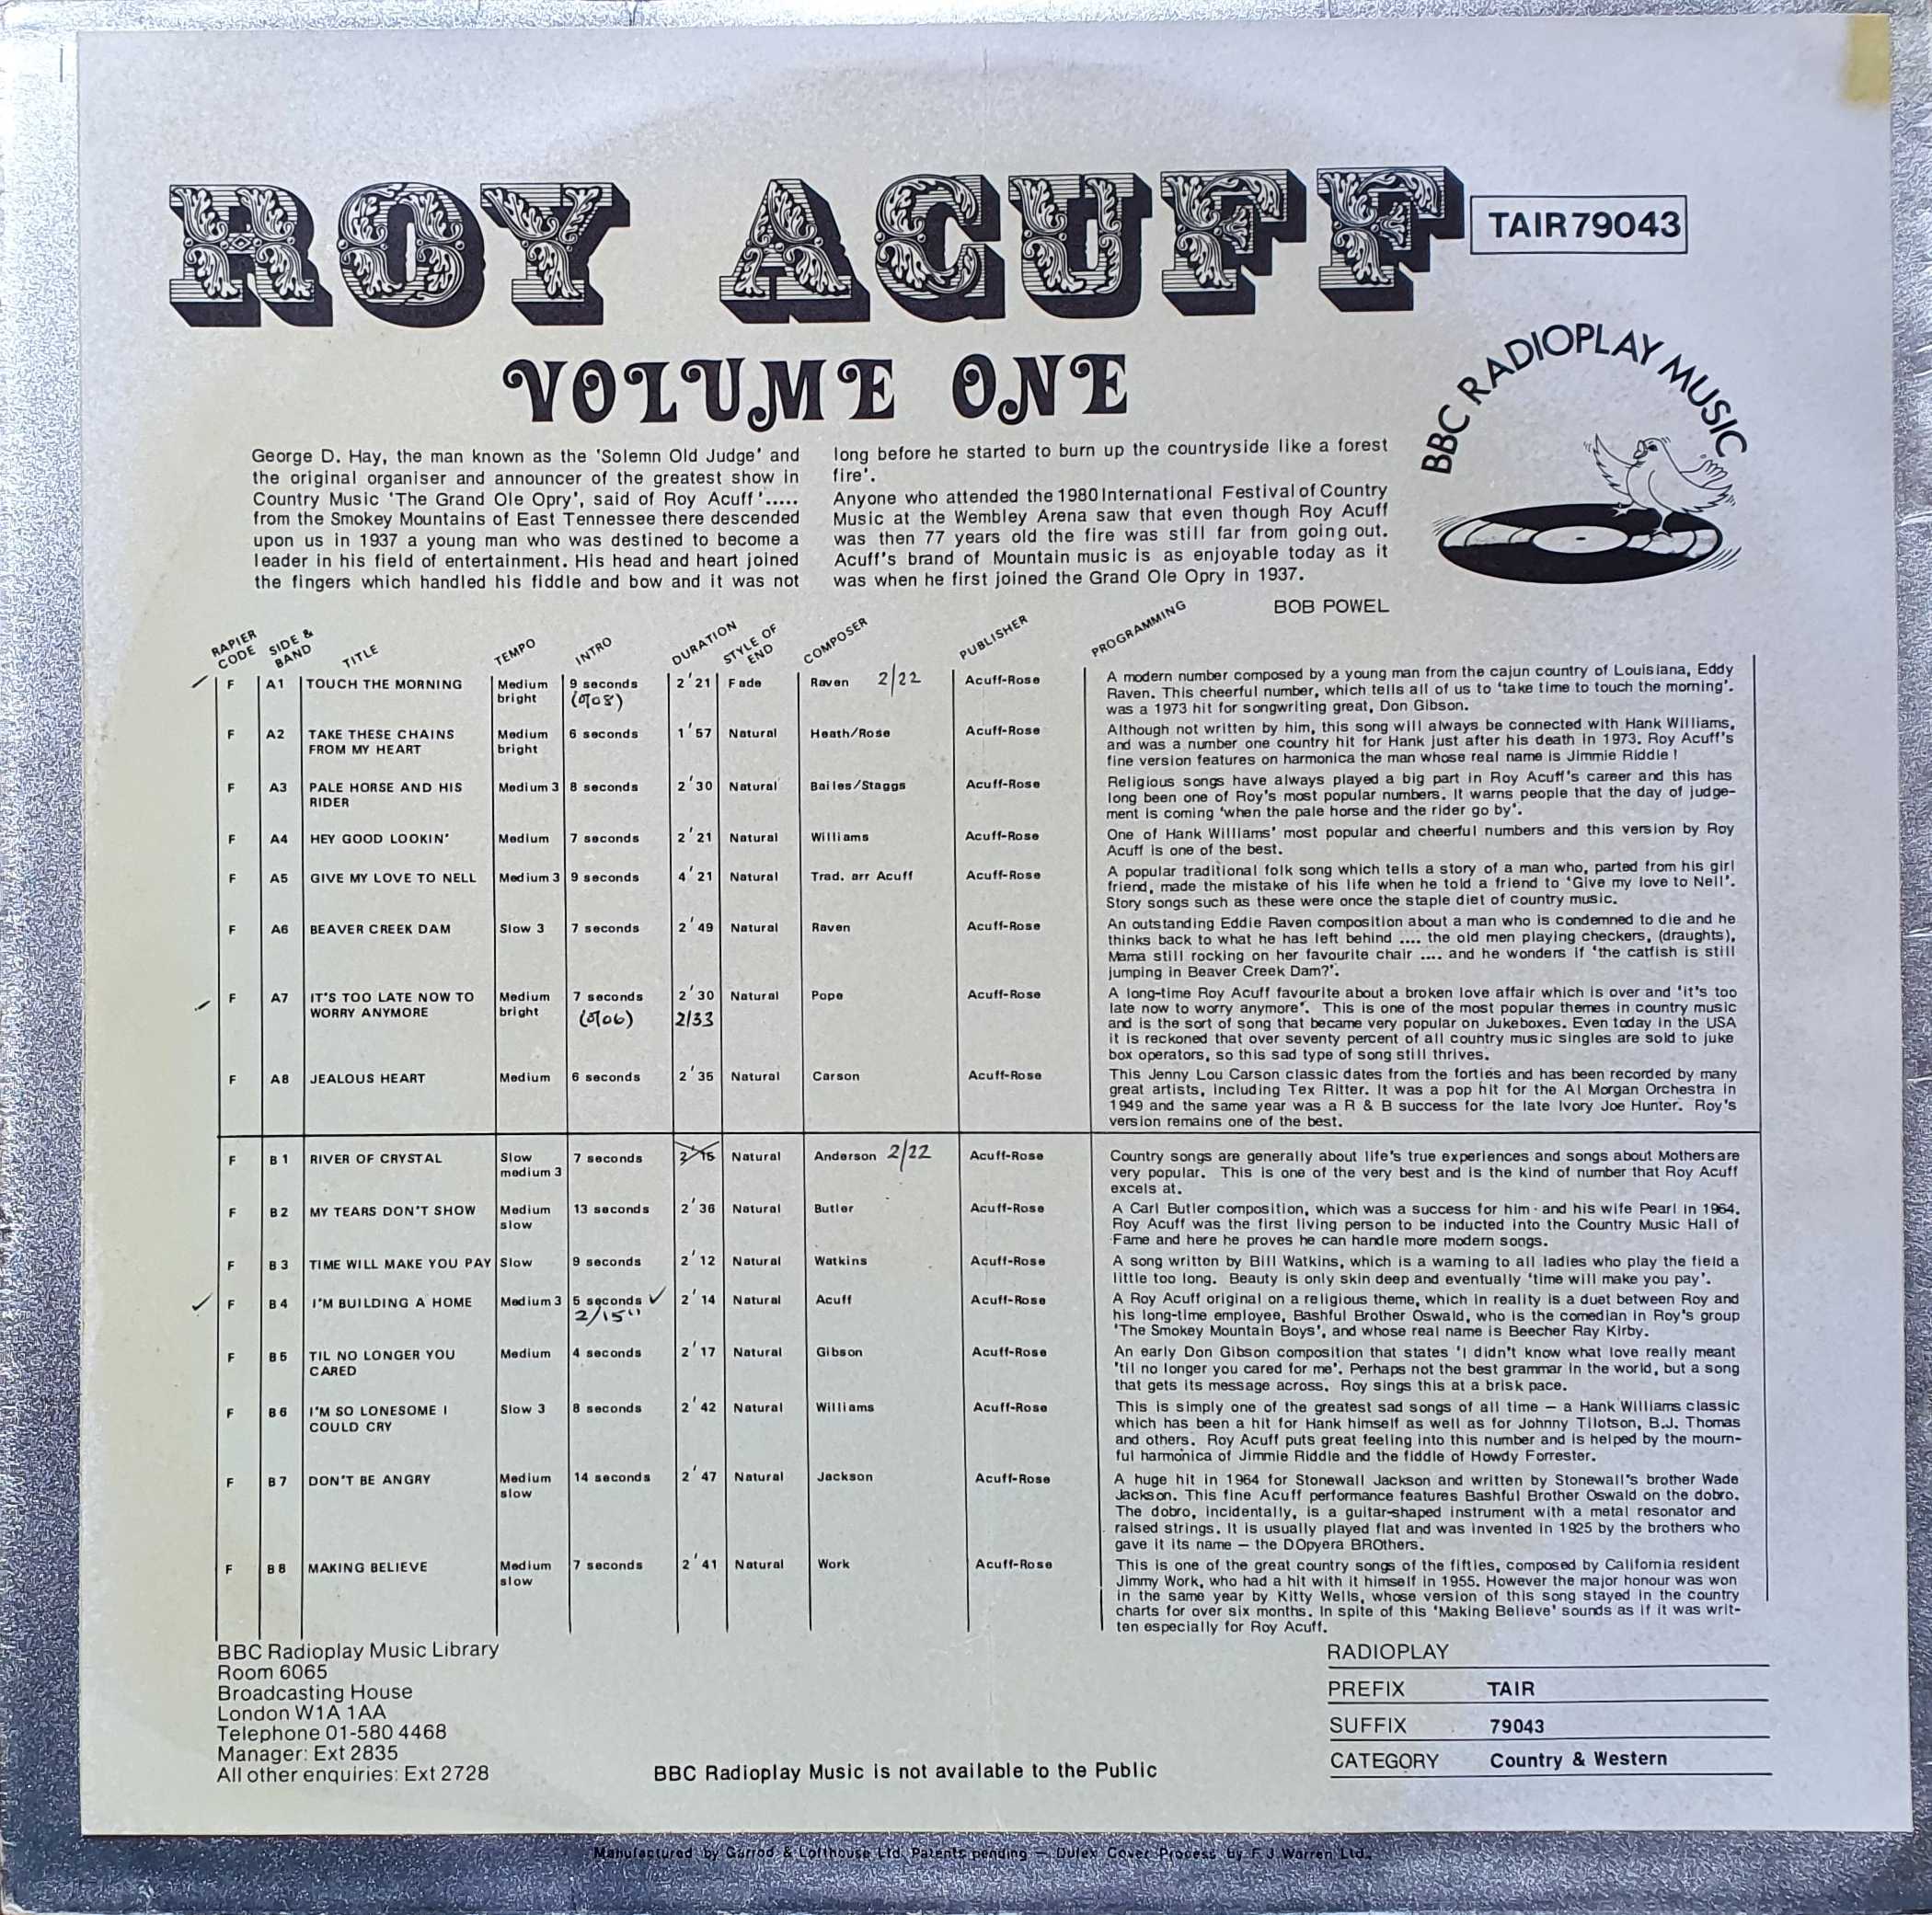 Picture of TAIR 79043 Roy Acuff I by artist Roy Acuff from the BBC records and Tapes library